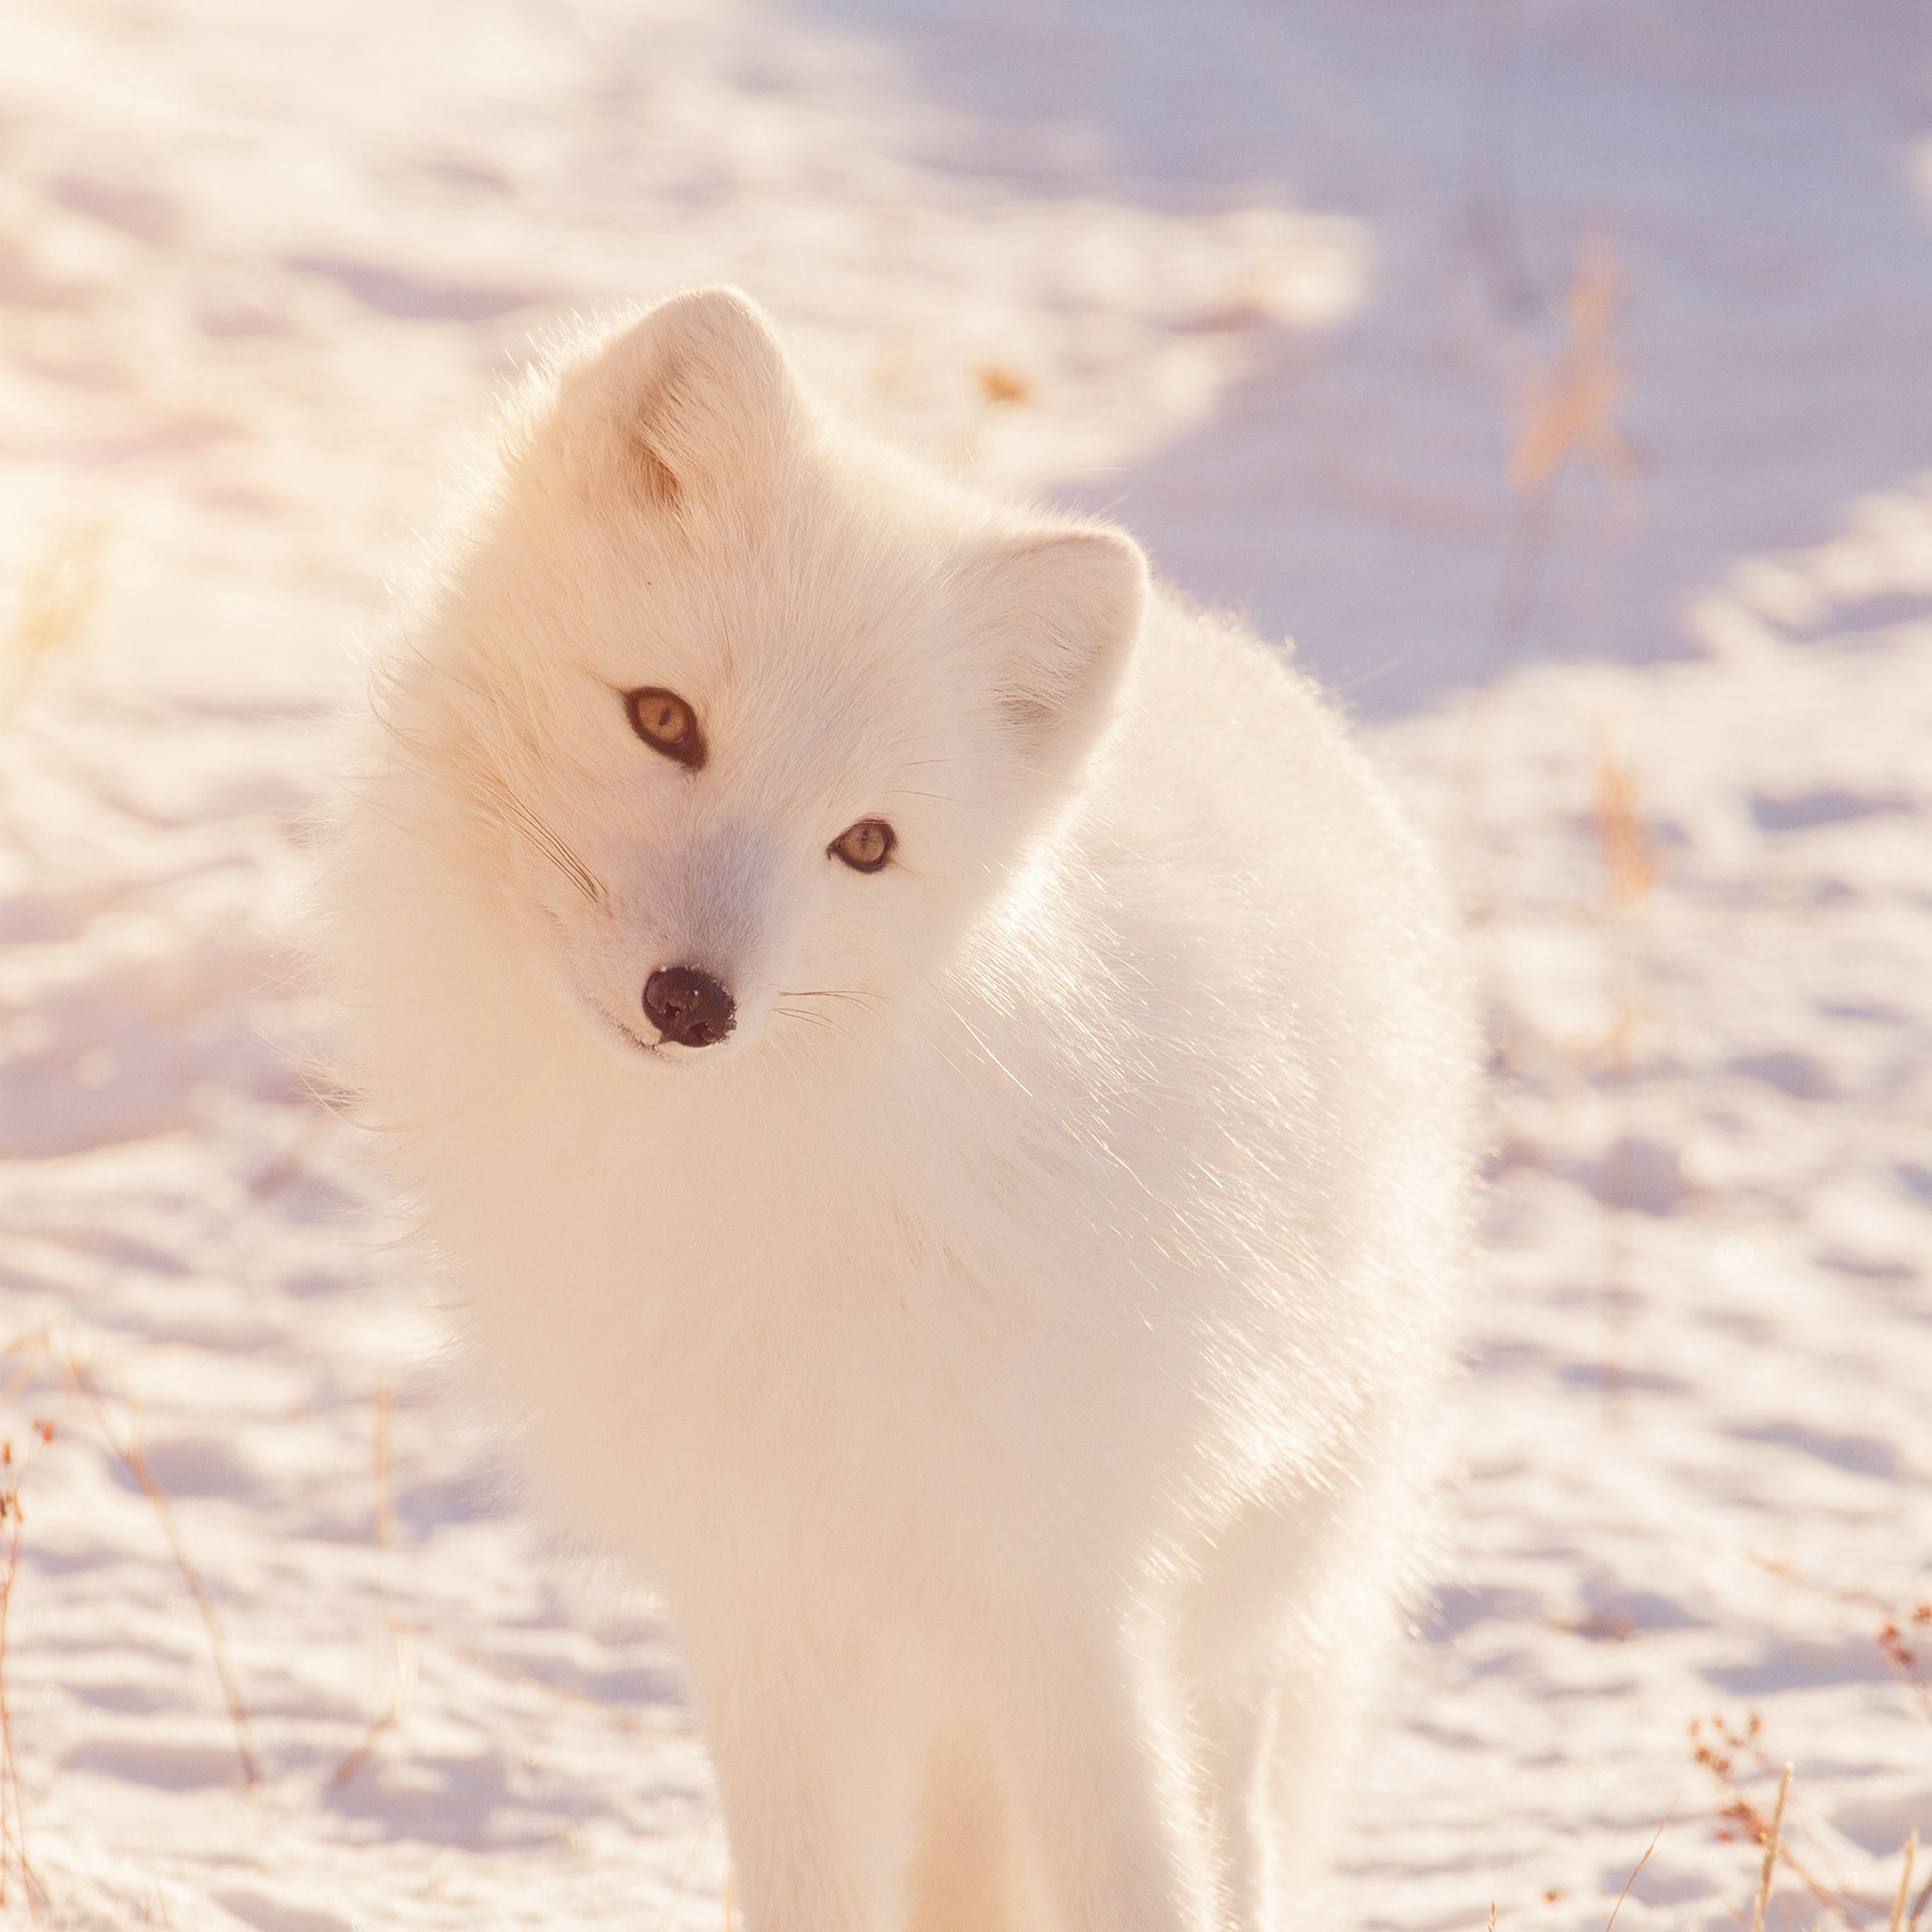 Winter Animal Fox White Flare iPad Pro Wallpapers Free Download